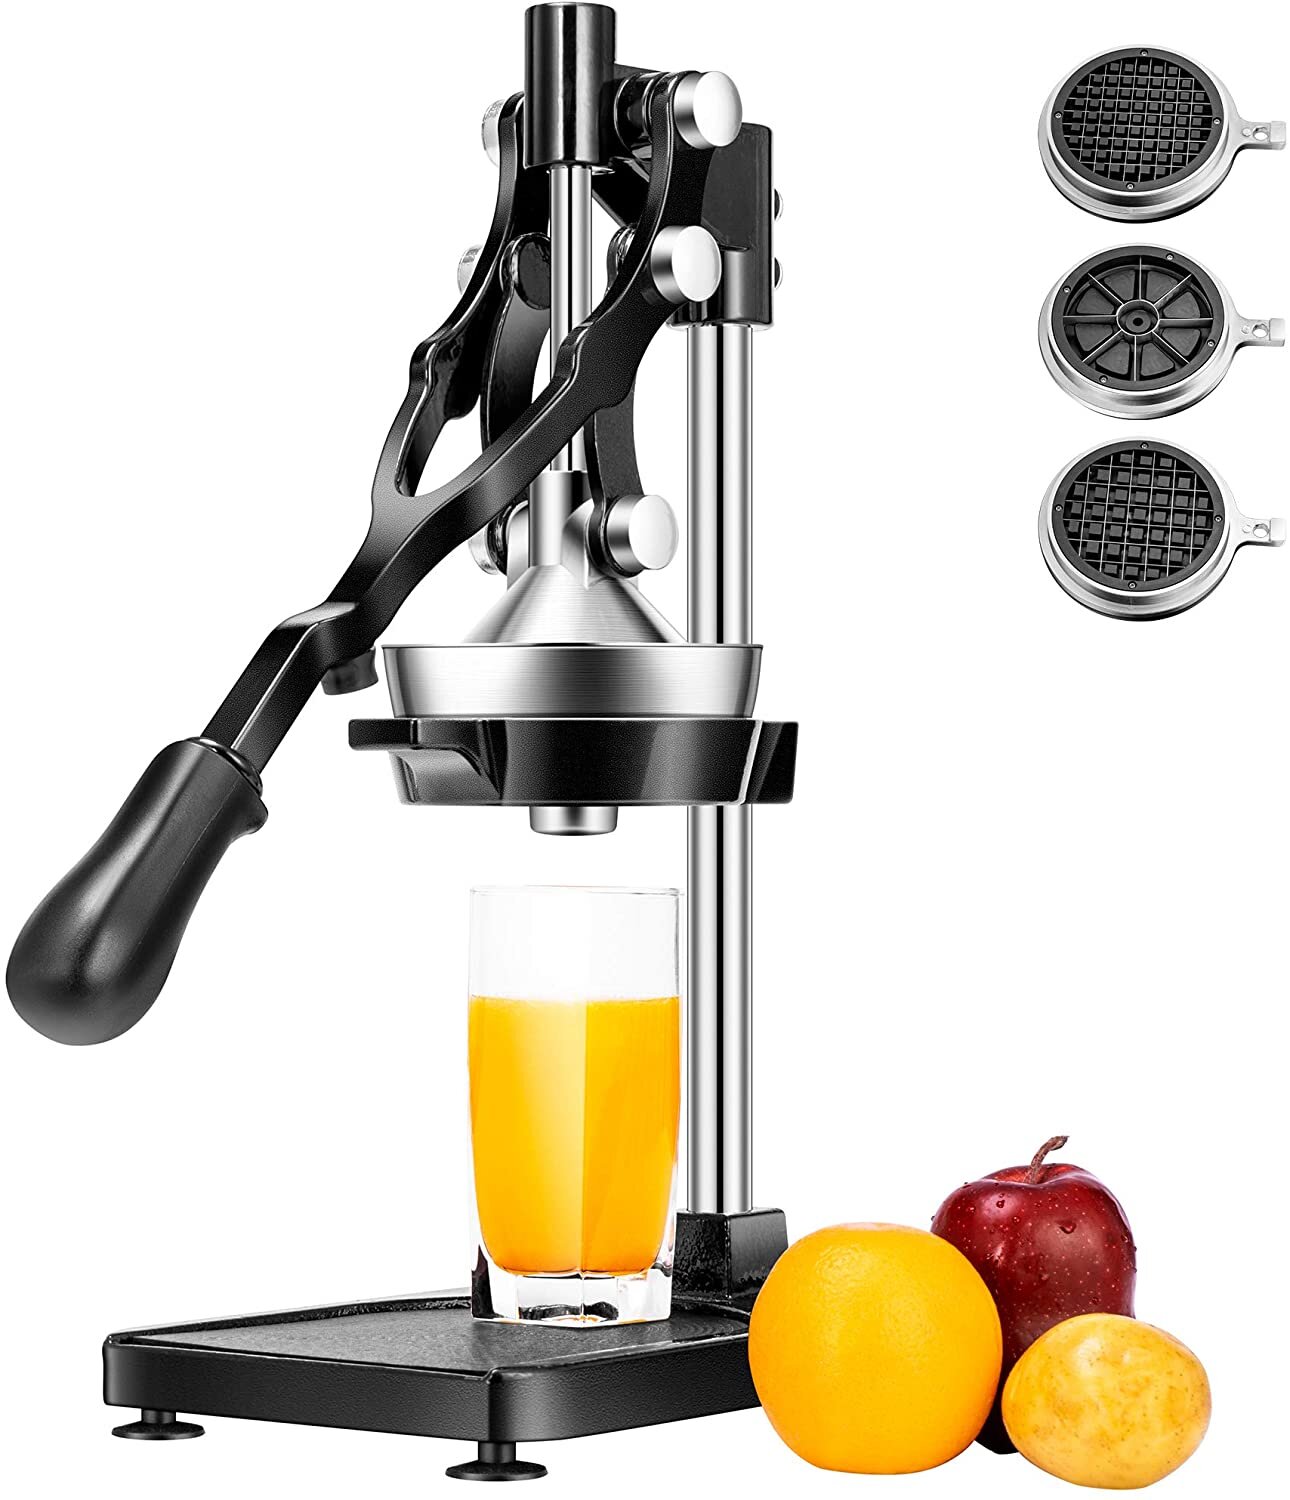 The best orange juicers: 6 manual and electric models